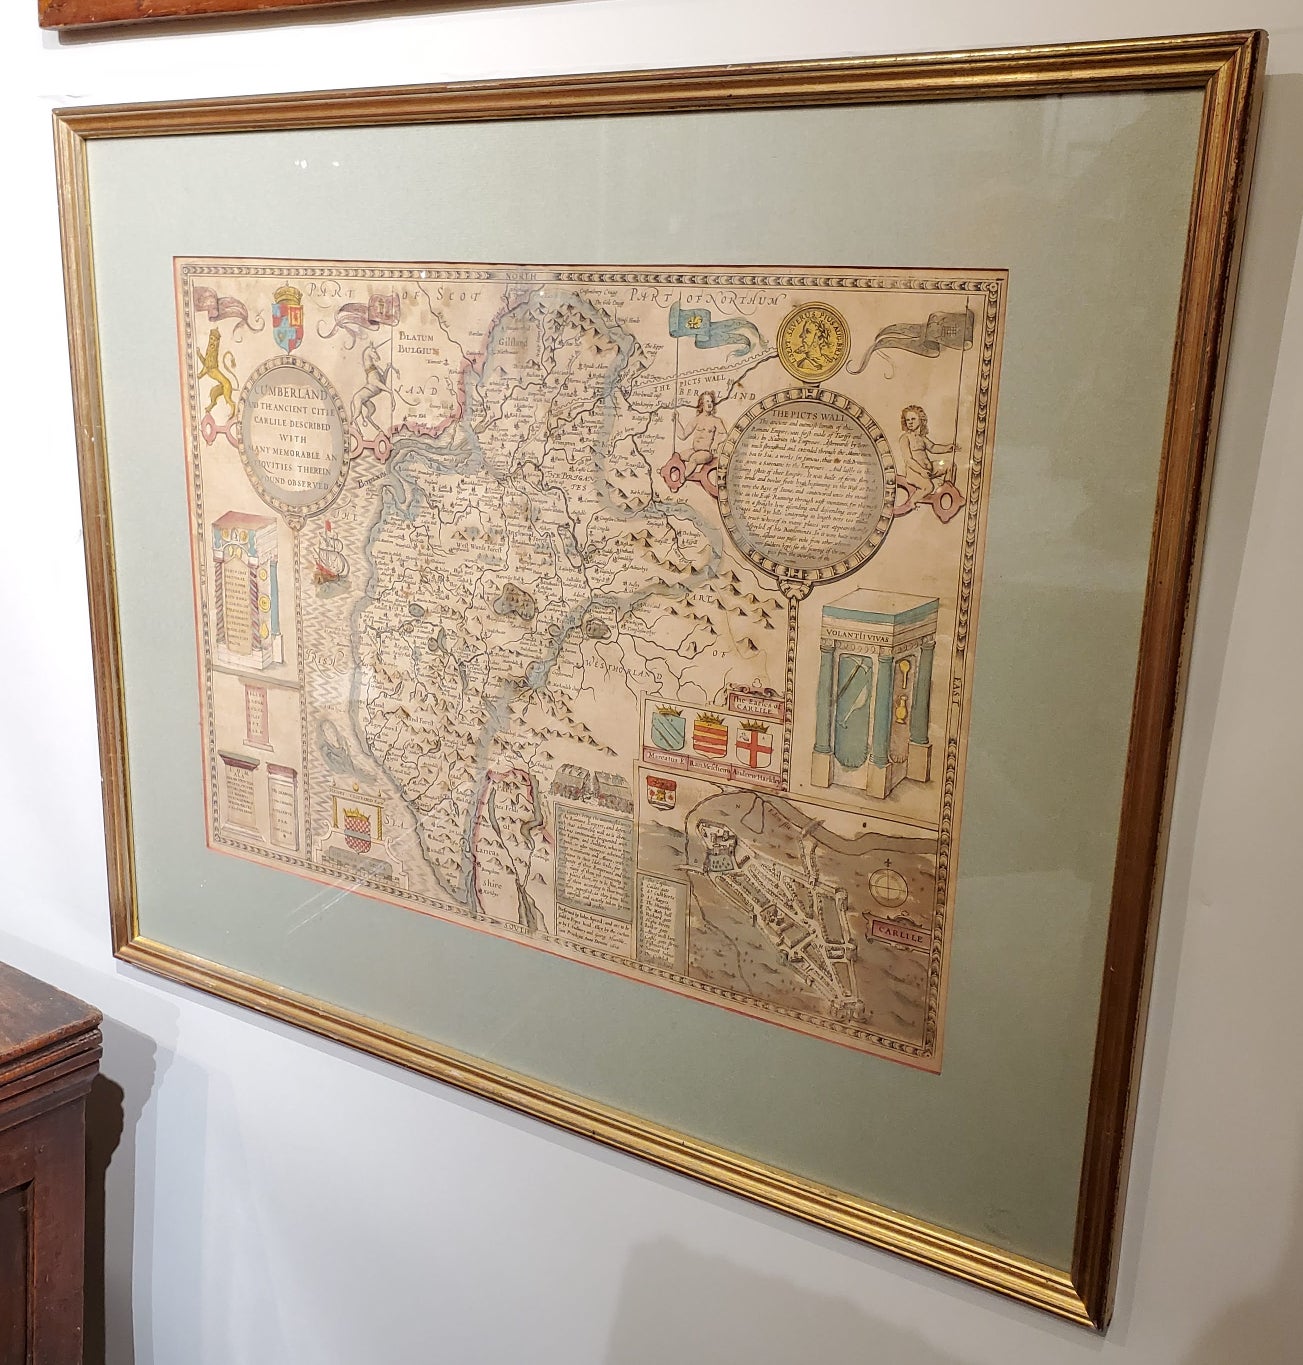 Rare extremely early map of the county of Cumberland in the Northwest of England. Printed by John Speed, hand colored. Excellent condition. 
English. Dated 1610.
Measures: 23” H 27” W framed.
     